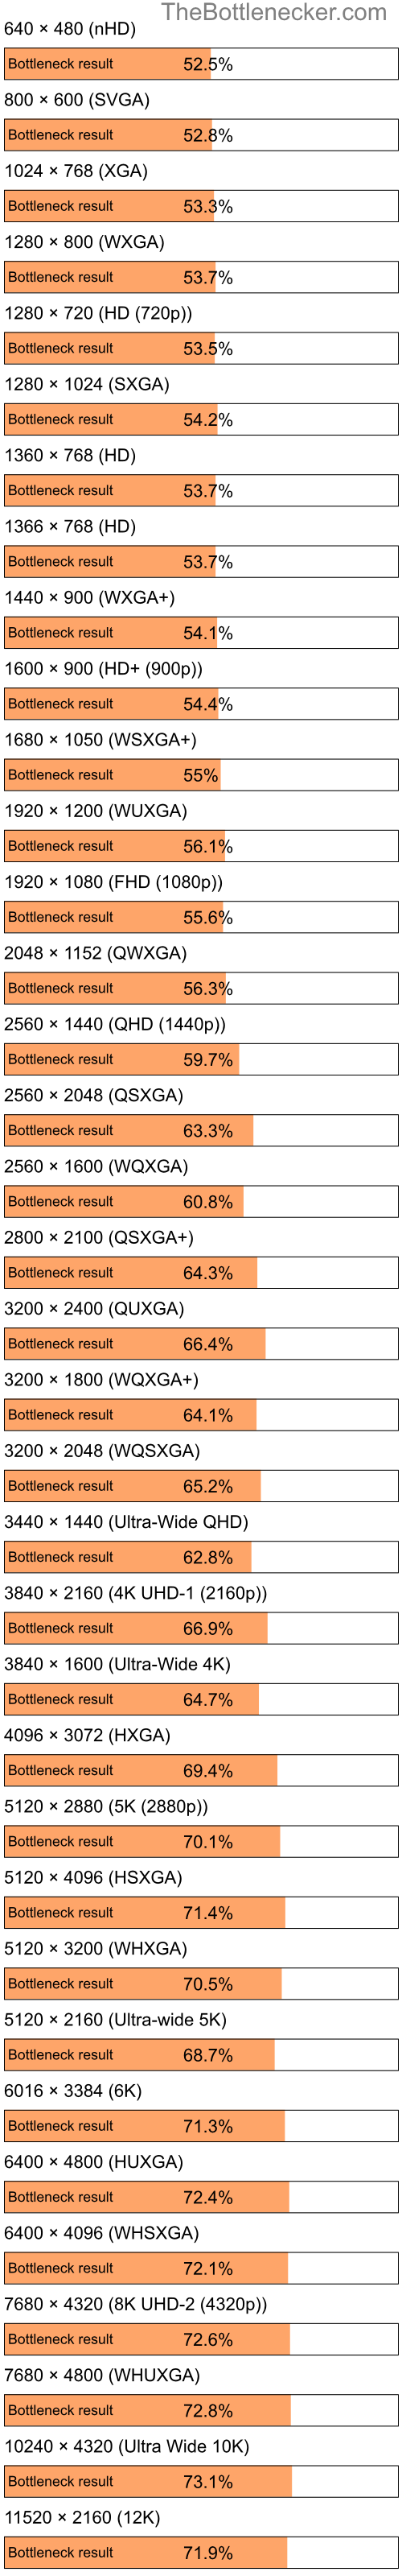 Bottleneck results by resolution for Intel Pentium 4 and AMD Radeon HD 7290 in Processor Intense Tasks